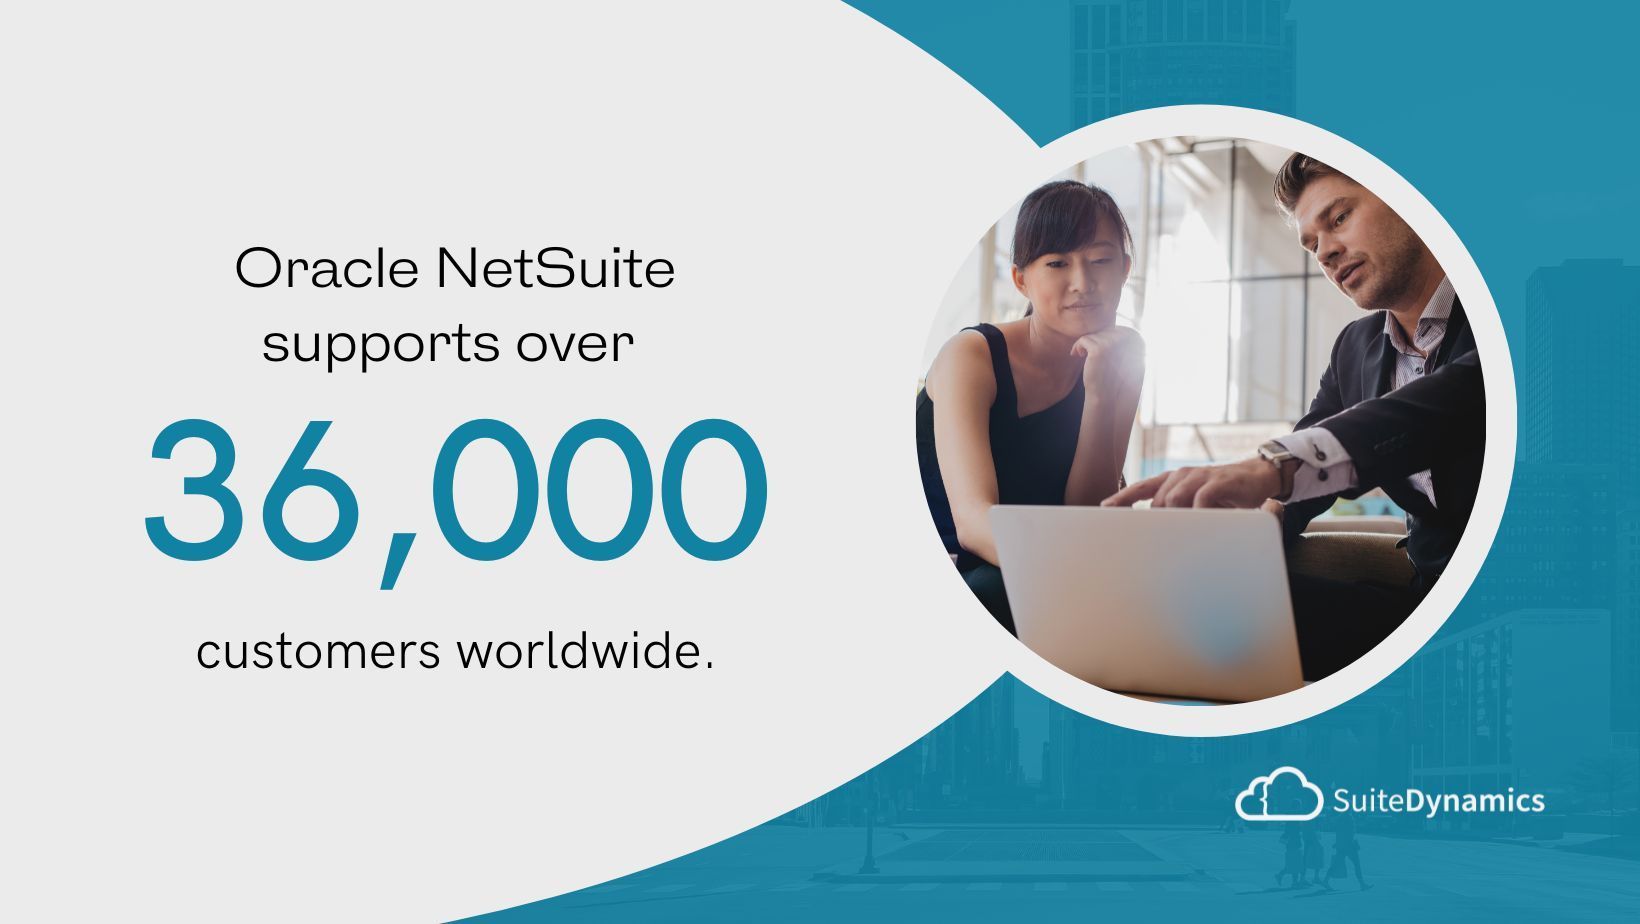 Graphic revealing that Oracle NetSuite supports over 36,000 customers globally.